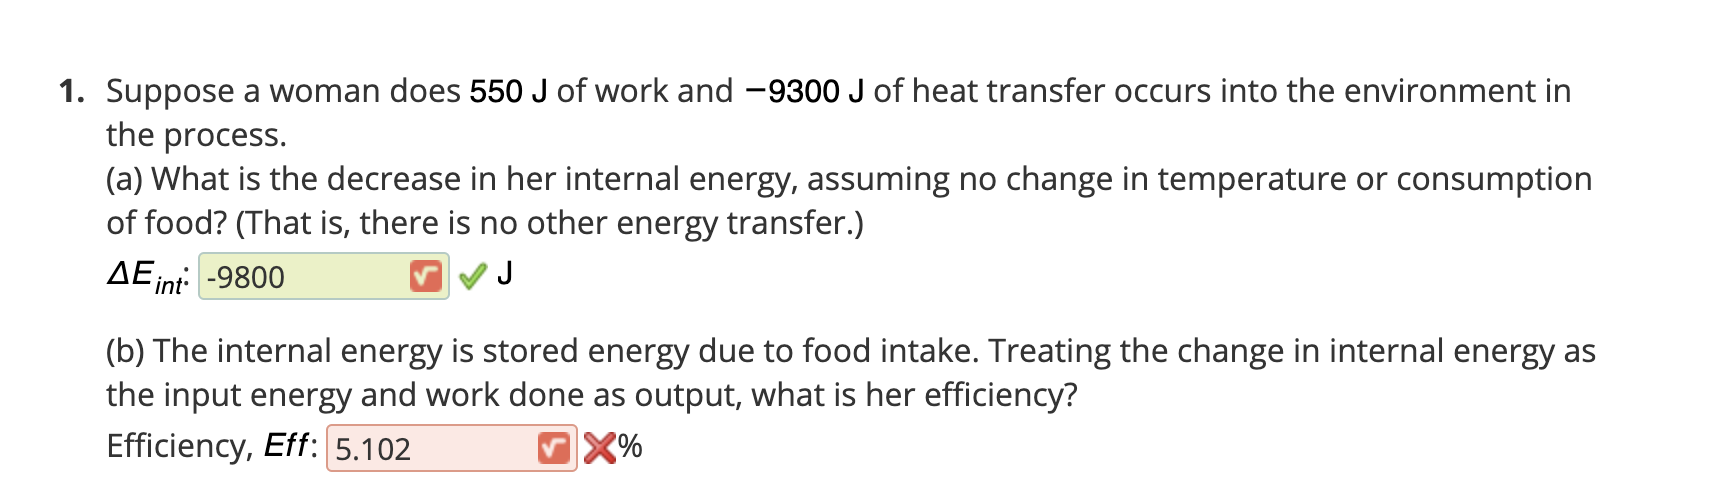 Suppose a woman does 550 J of work and -9300 J of heat transfer occurs into the environment in
the process.
(a) What is the decrease in her internal energy, assuming no change in temperature or consumption
of food? (That is, there is no other energy transfer.)
AEint -9800
(b) The internal energy is stored energy due to food intake. Treating the change in internal energy as
the input energy and work done as output, what is her efficiency?
Efficiency, Eff: 5.102
